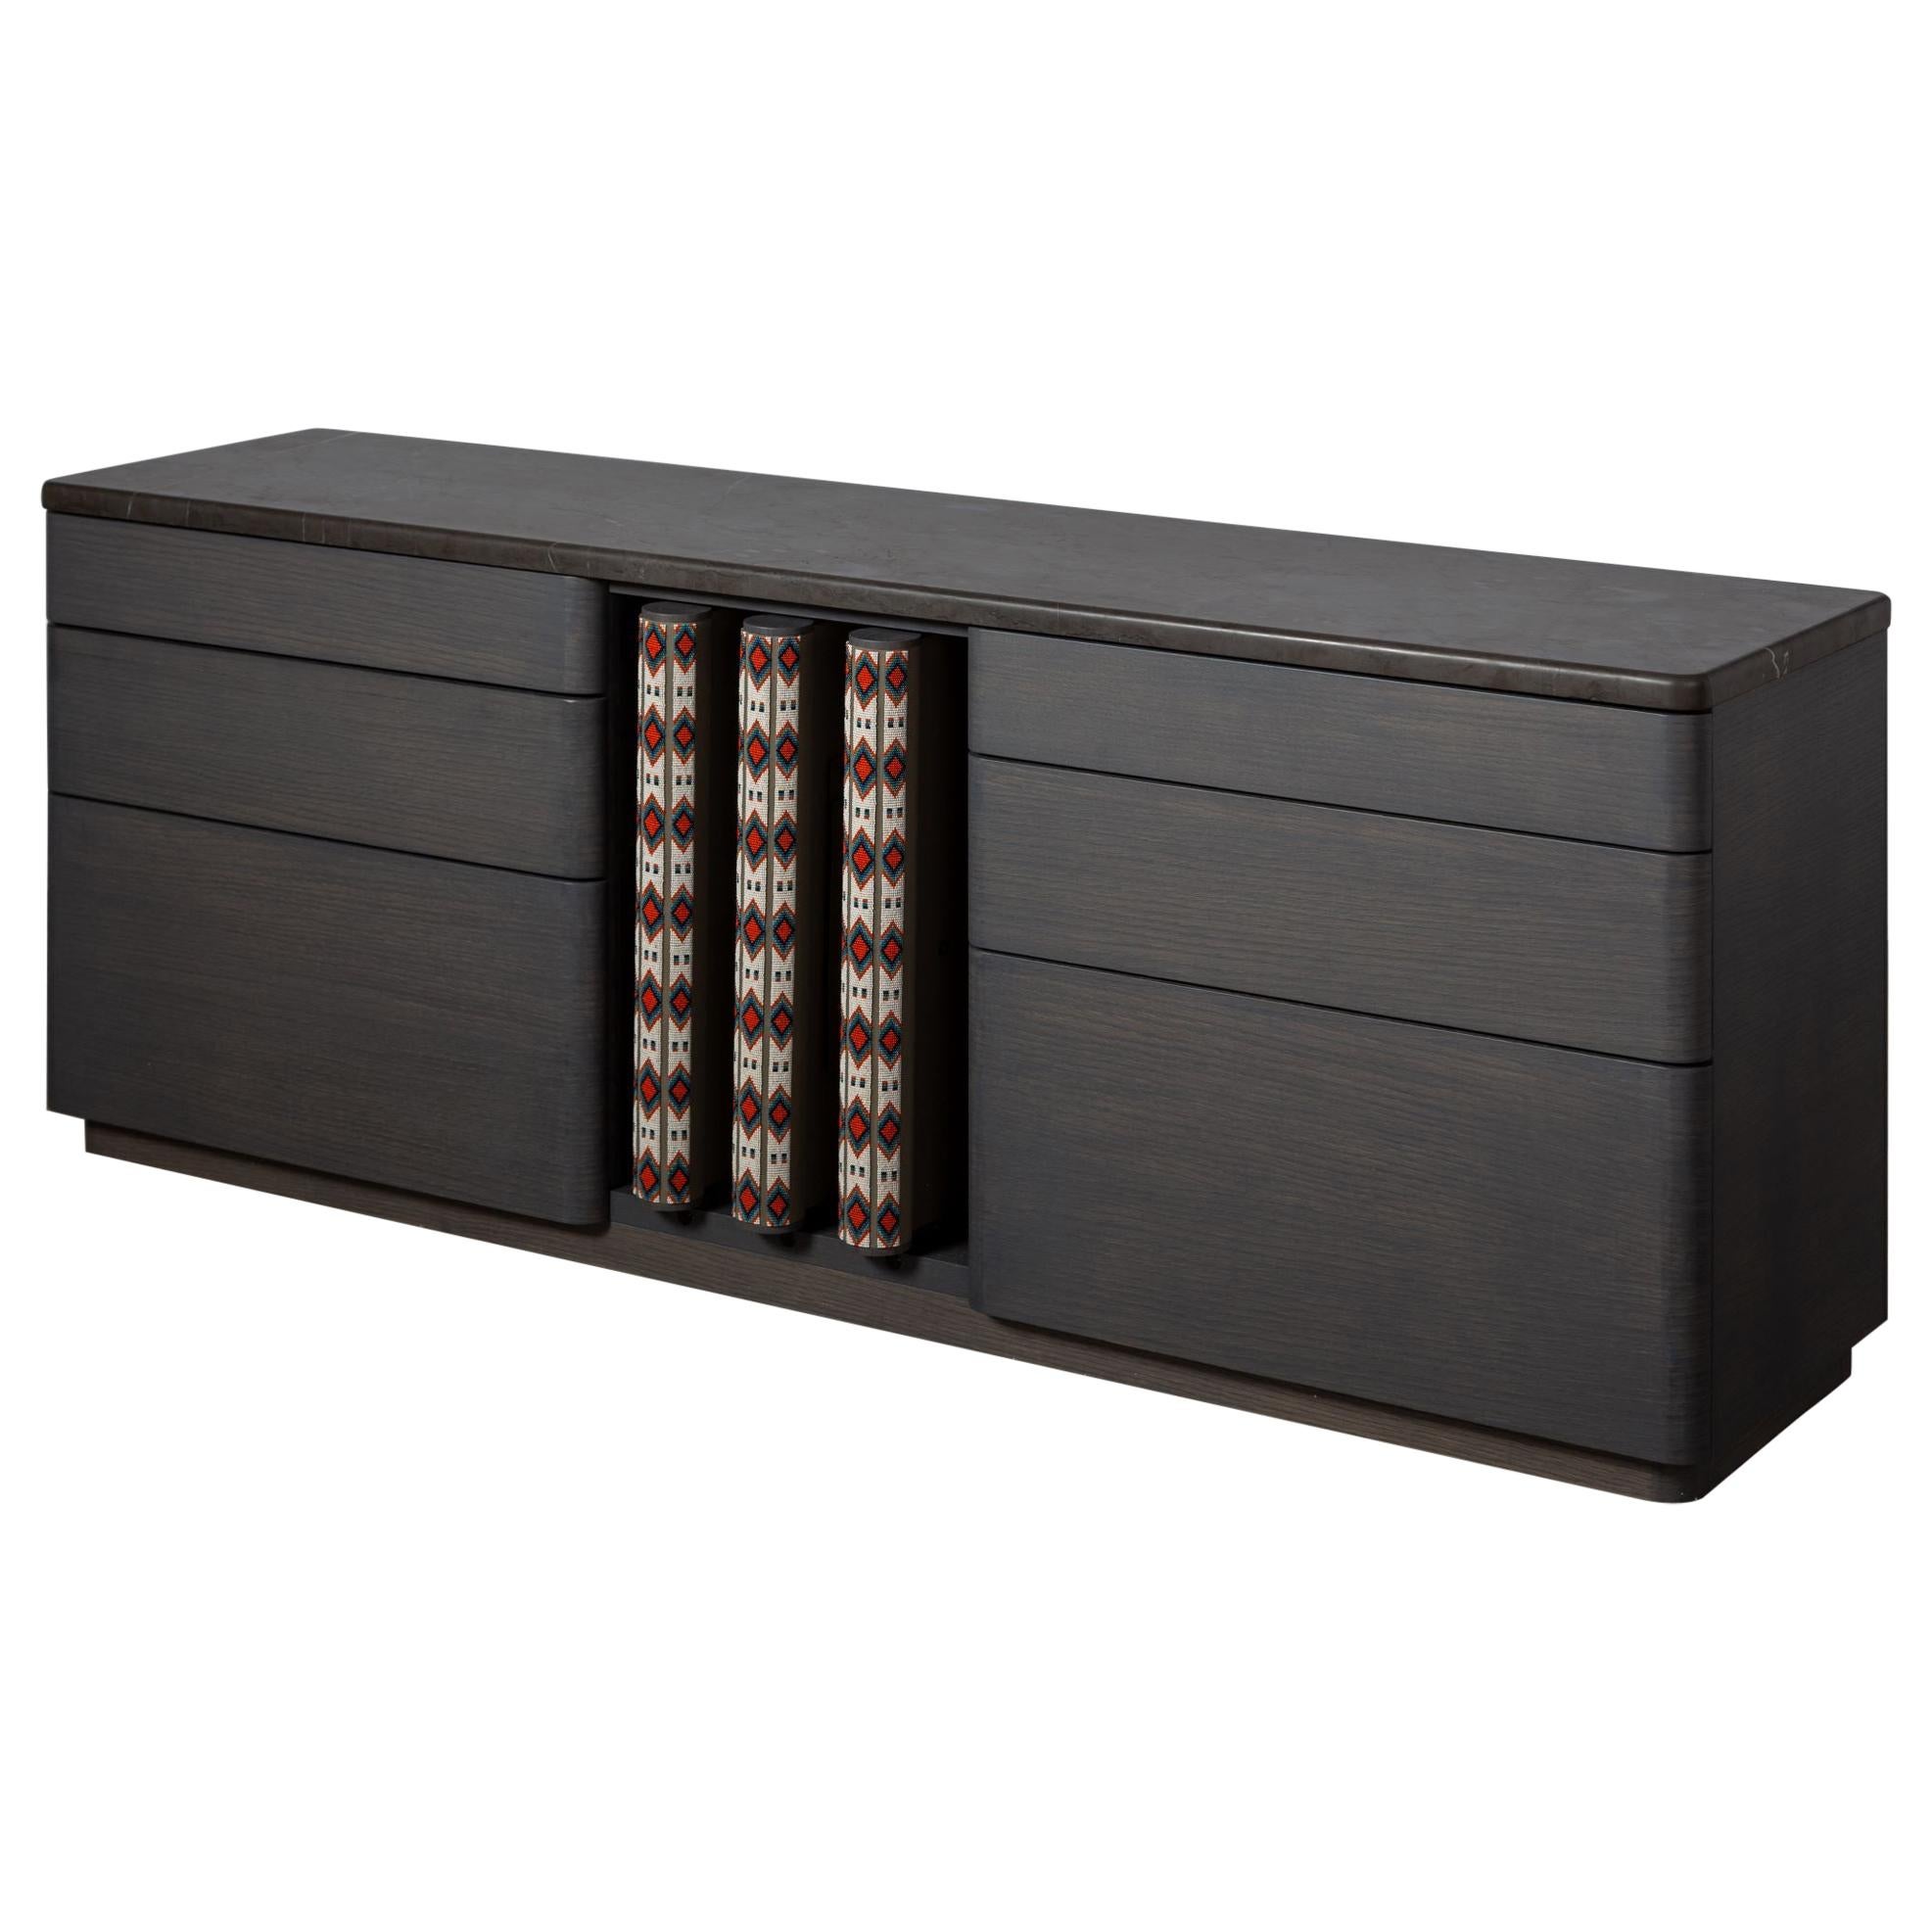 Contemporary credenza of oak, leather and marble from the SoShiro Pok collection